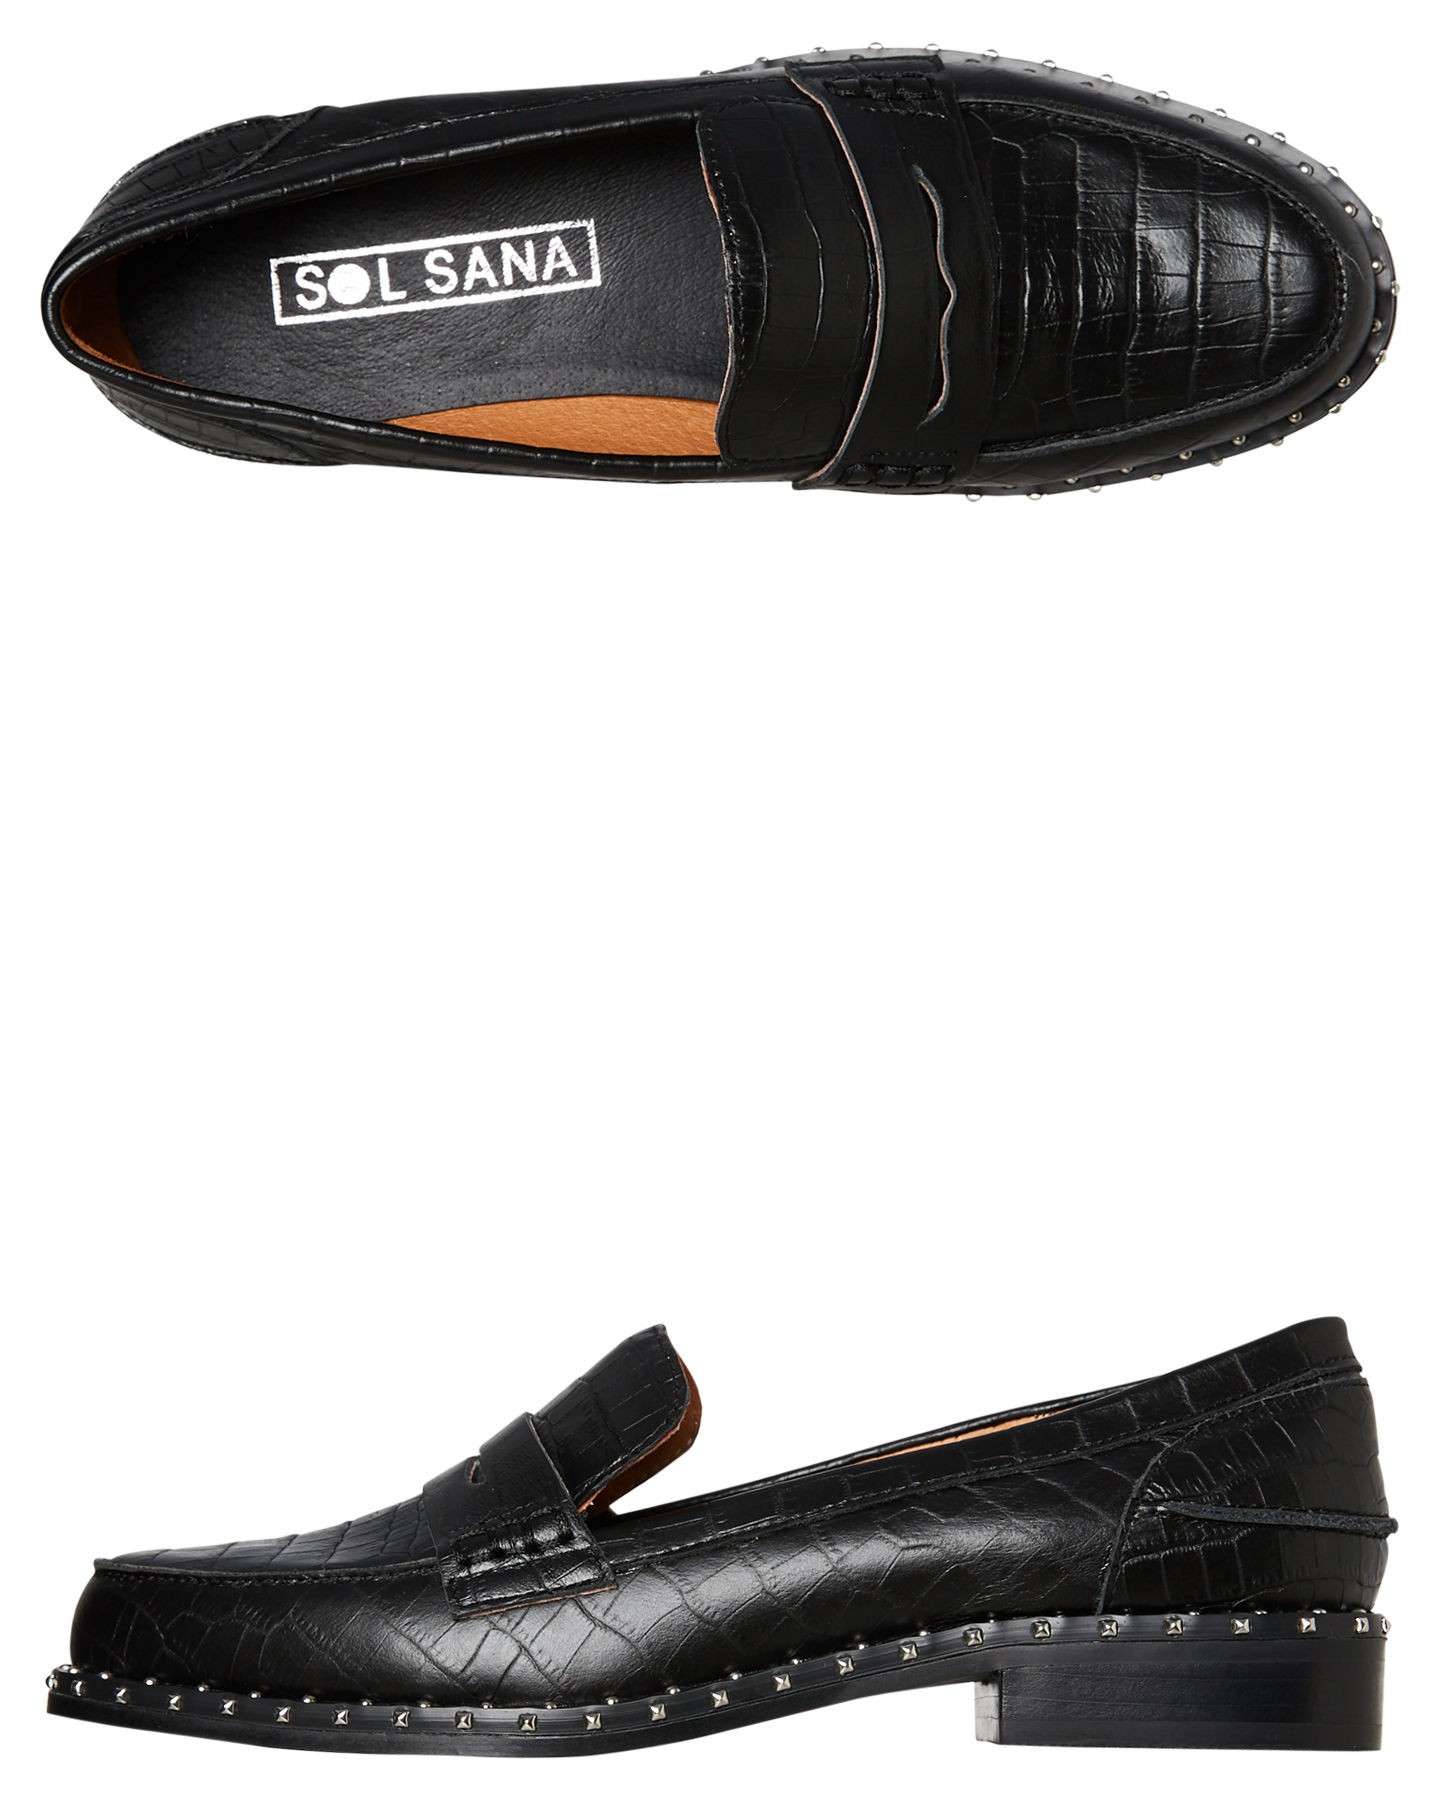 womens black croc loafers